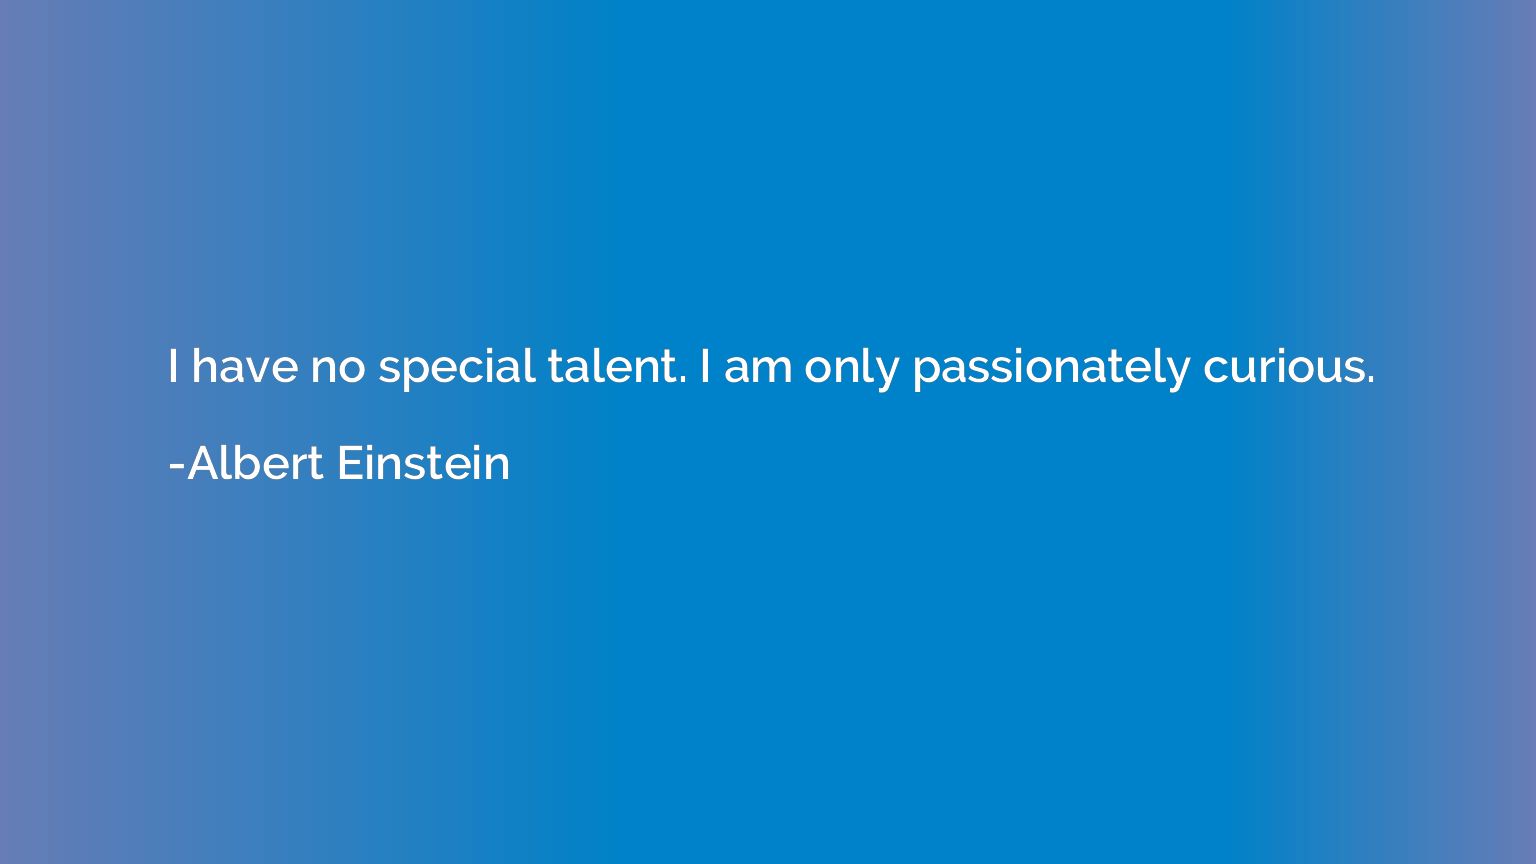 I have no special talent. I am only passionately curious.